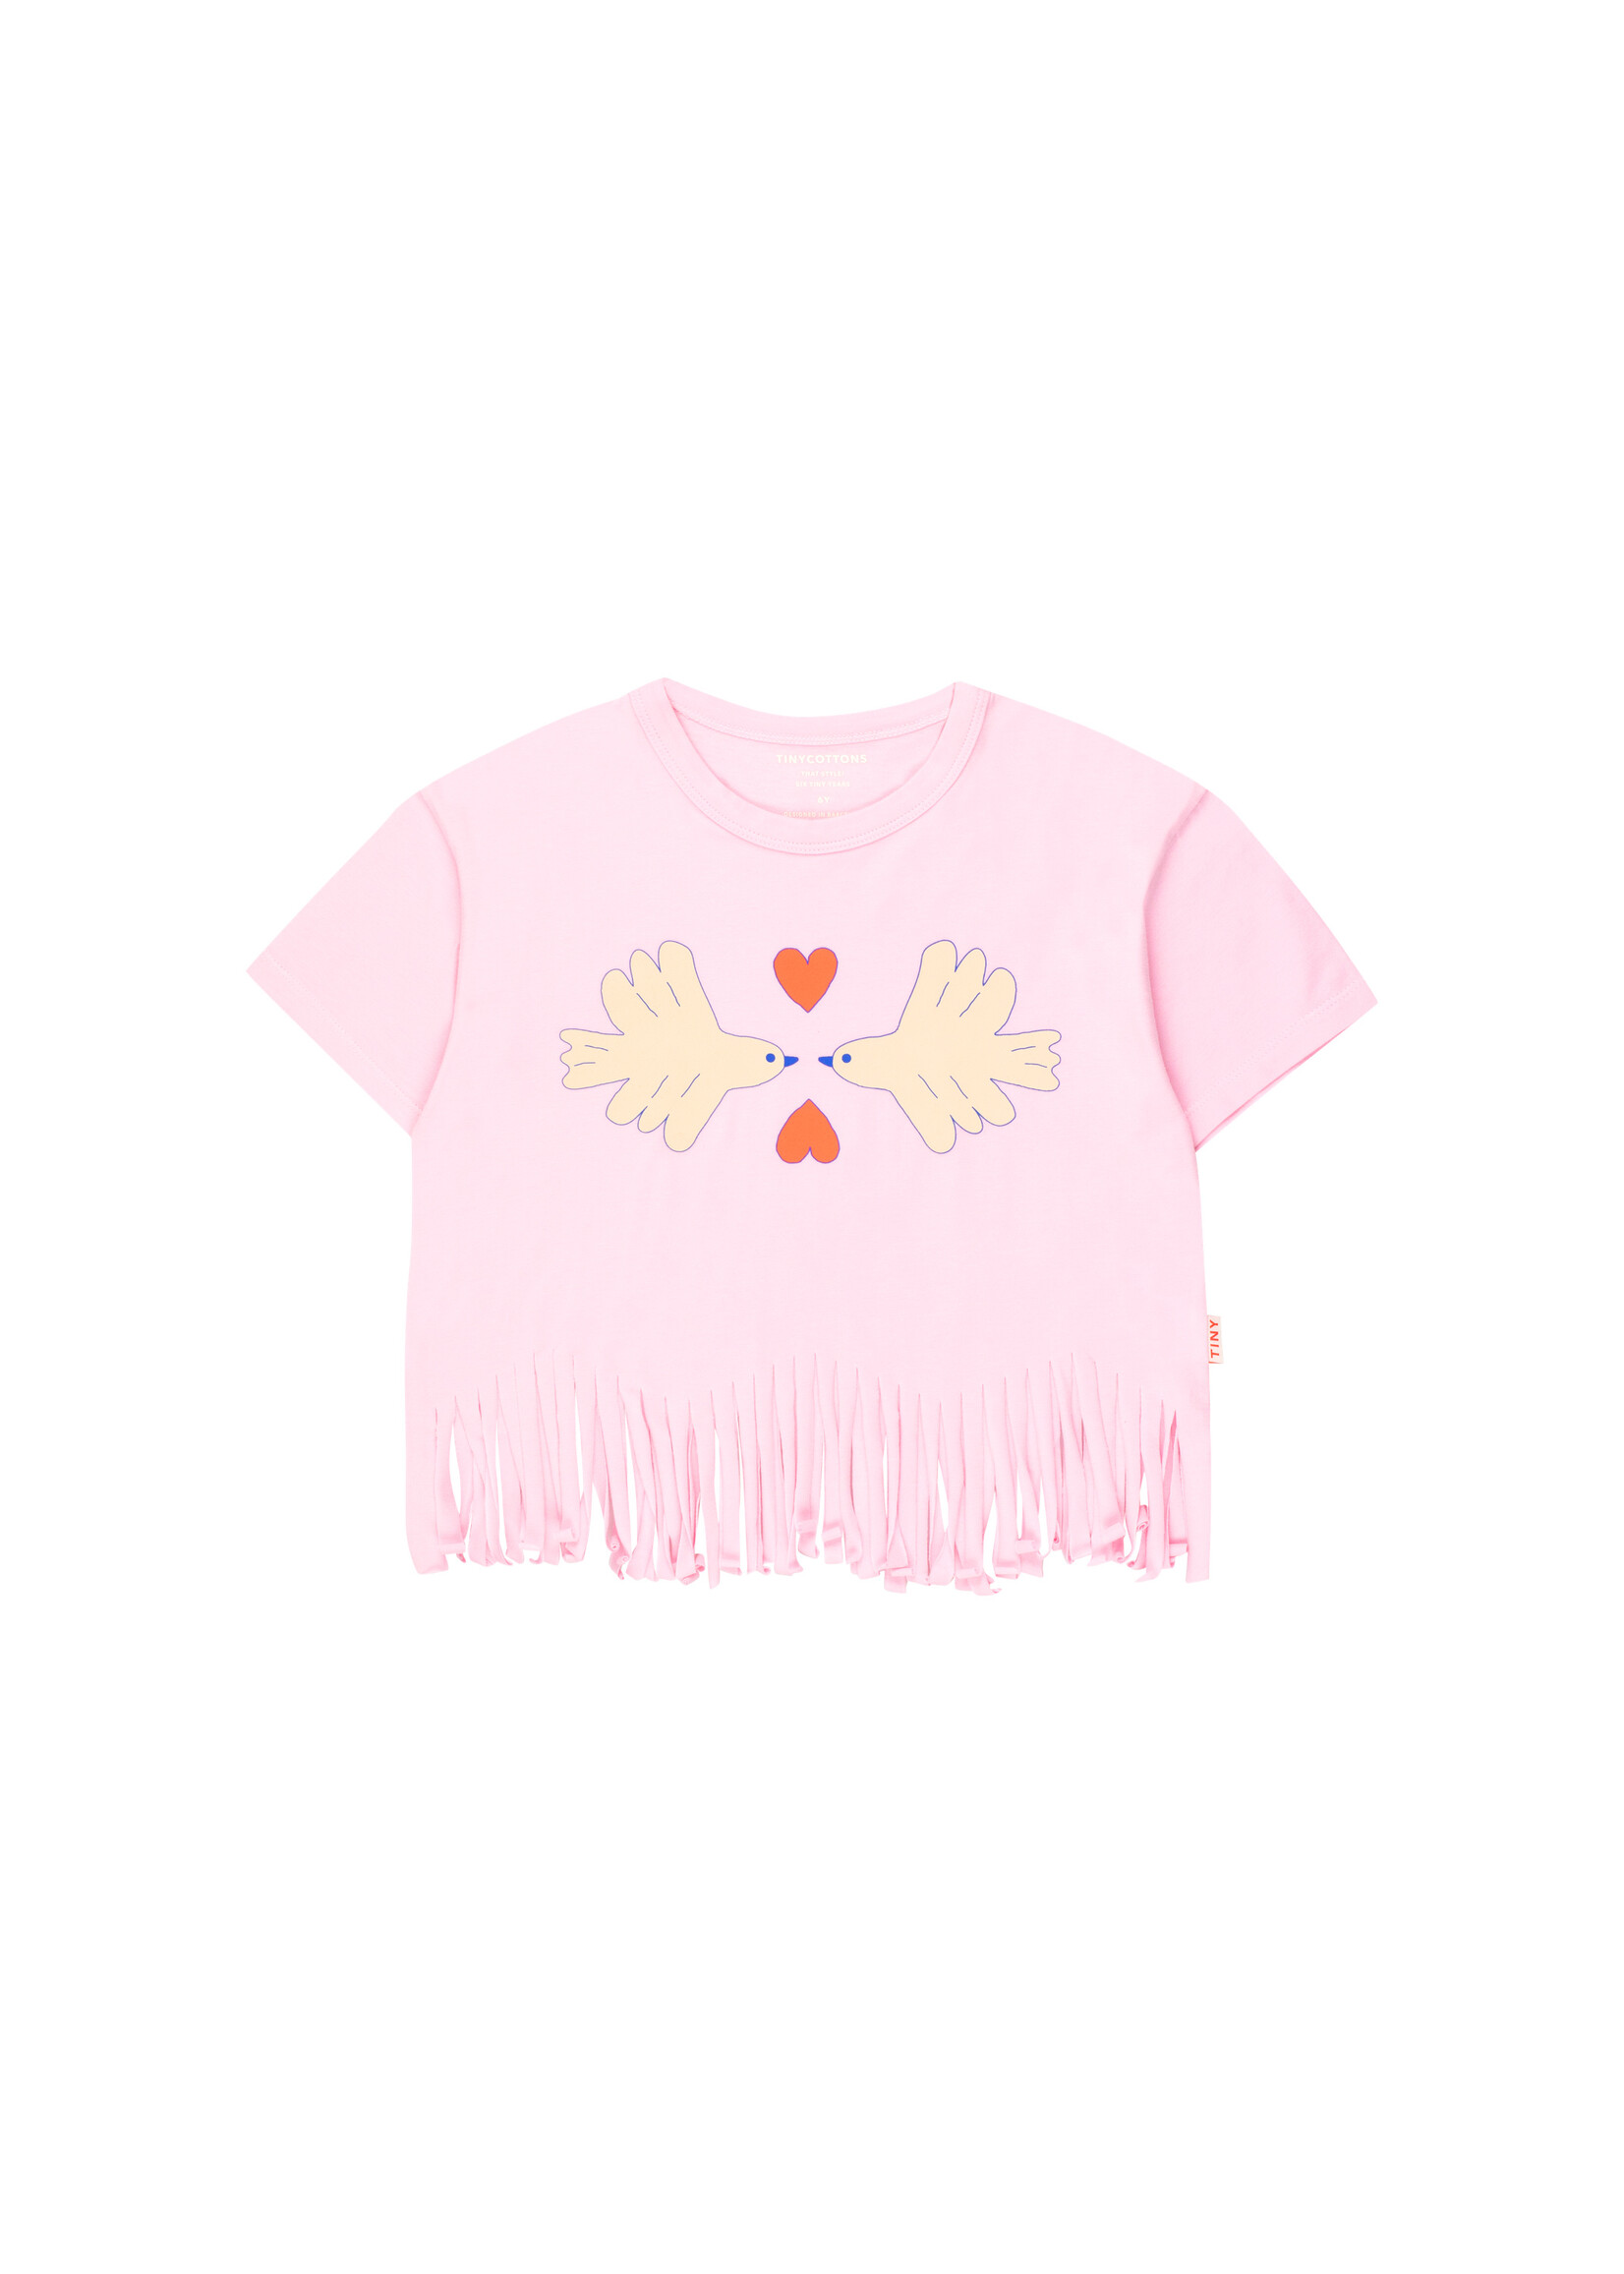 Tiny Cottons Tiny Cottons - DOVES TEE light pink